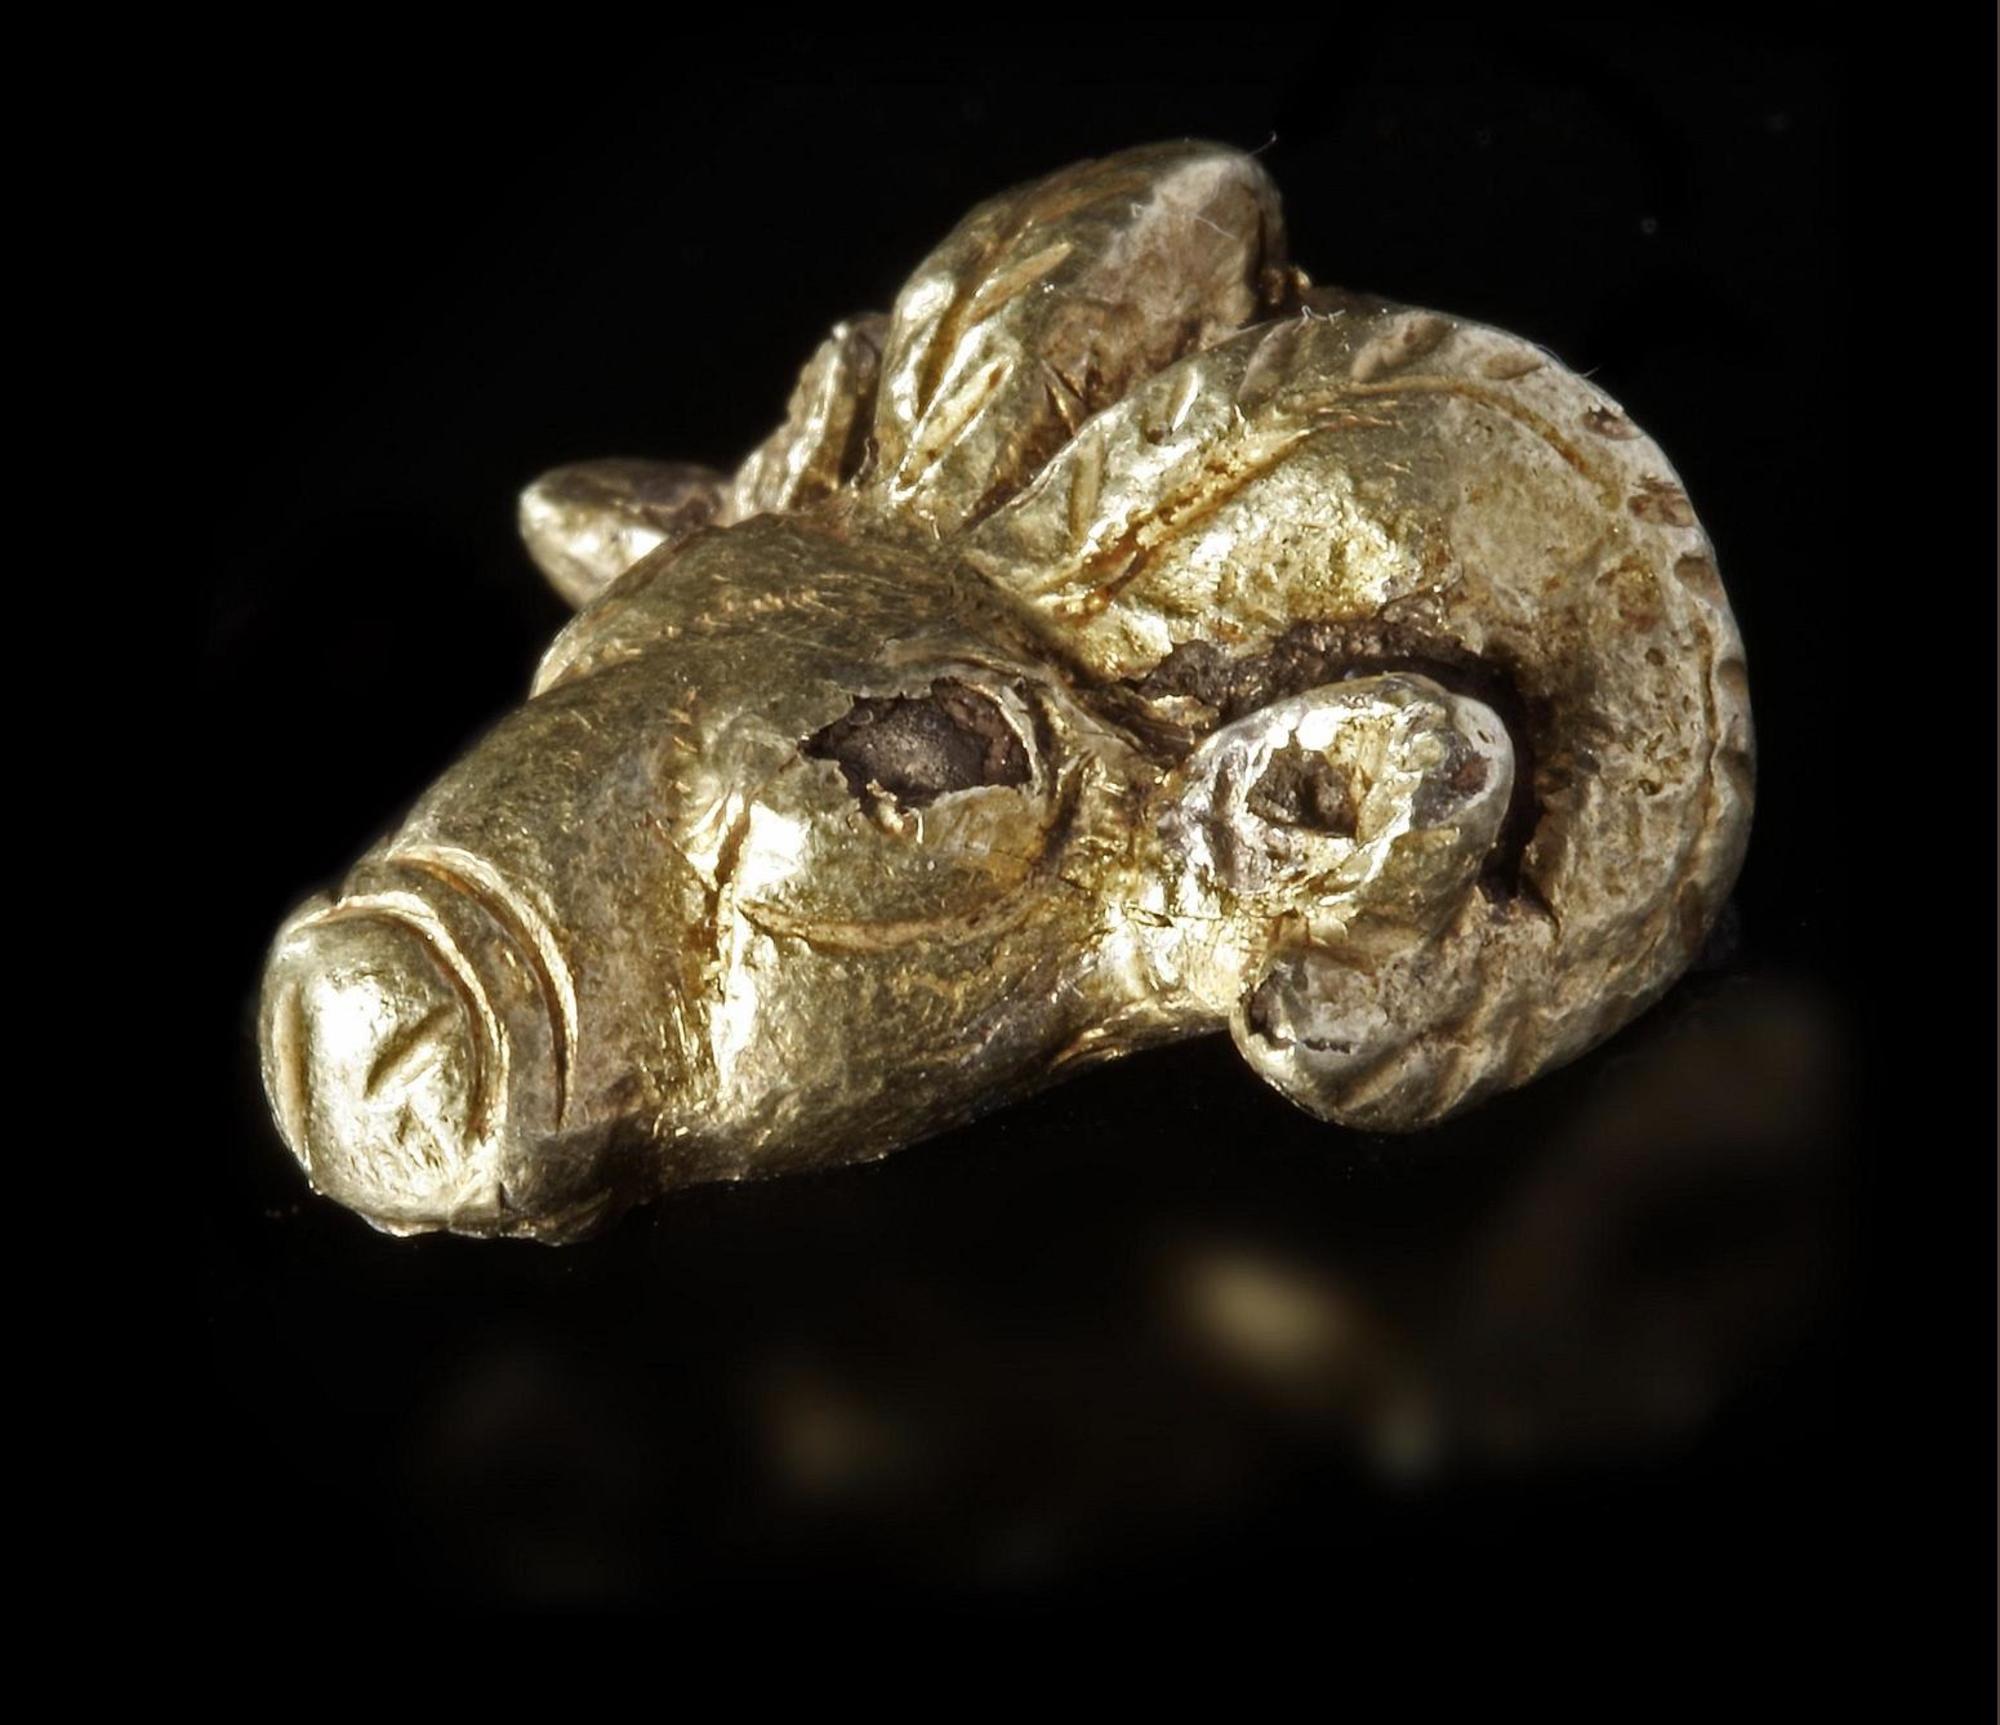 A NEO-ELAMITE GOLD FOIL-COVERED SILVER RAM HEADED AMULET PENDANT, CIRCA 1100-540 B.C. - Image 2 of 6